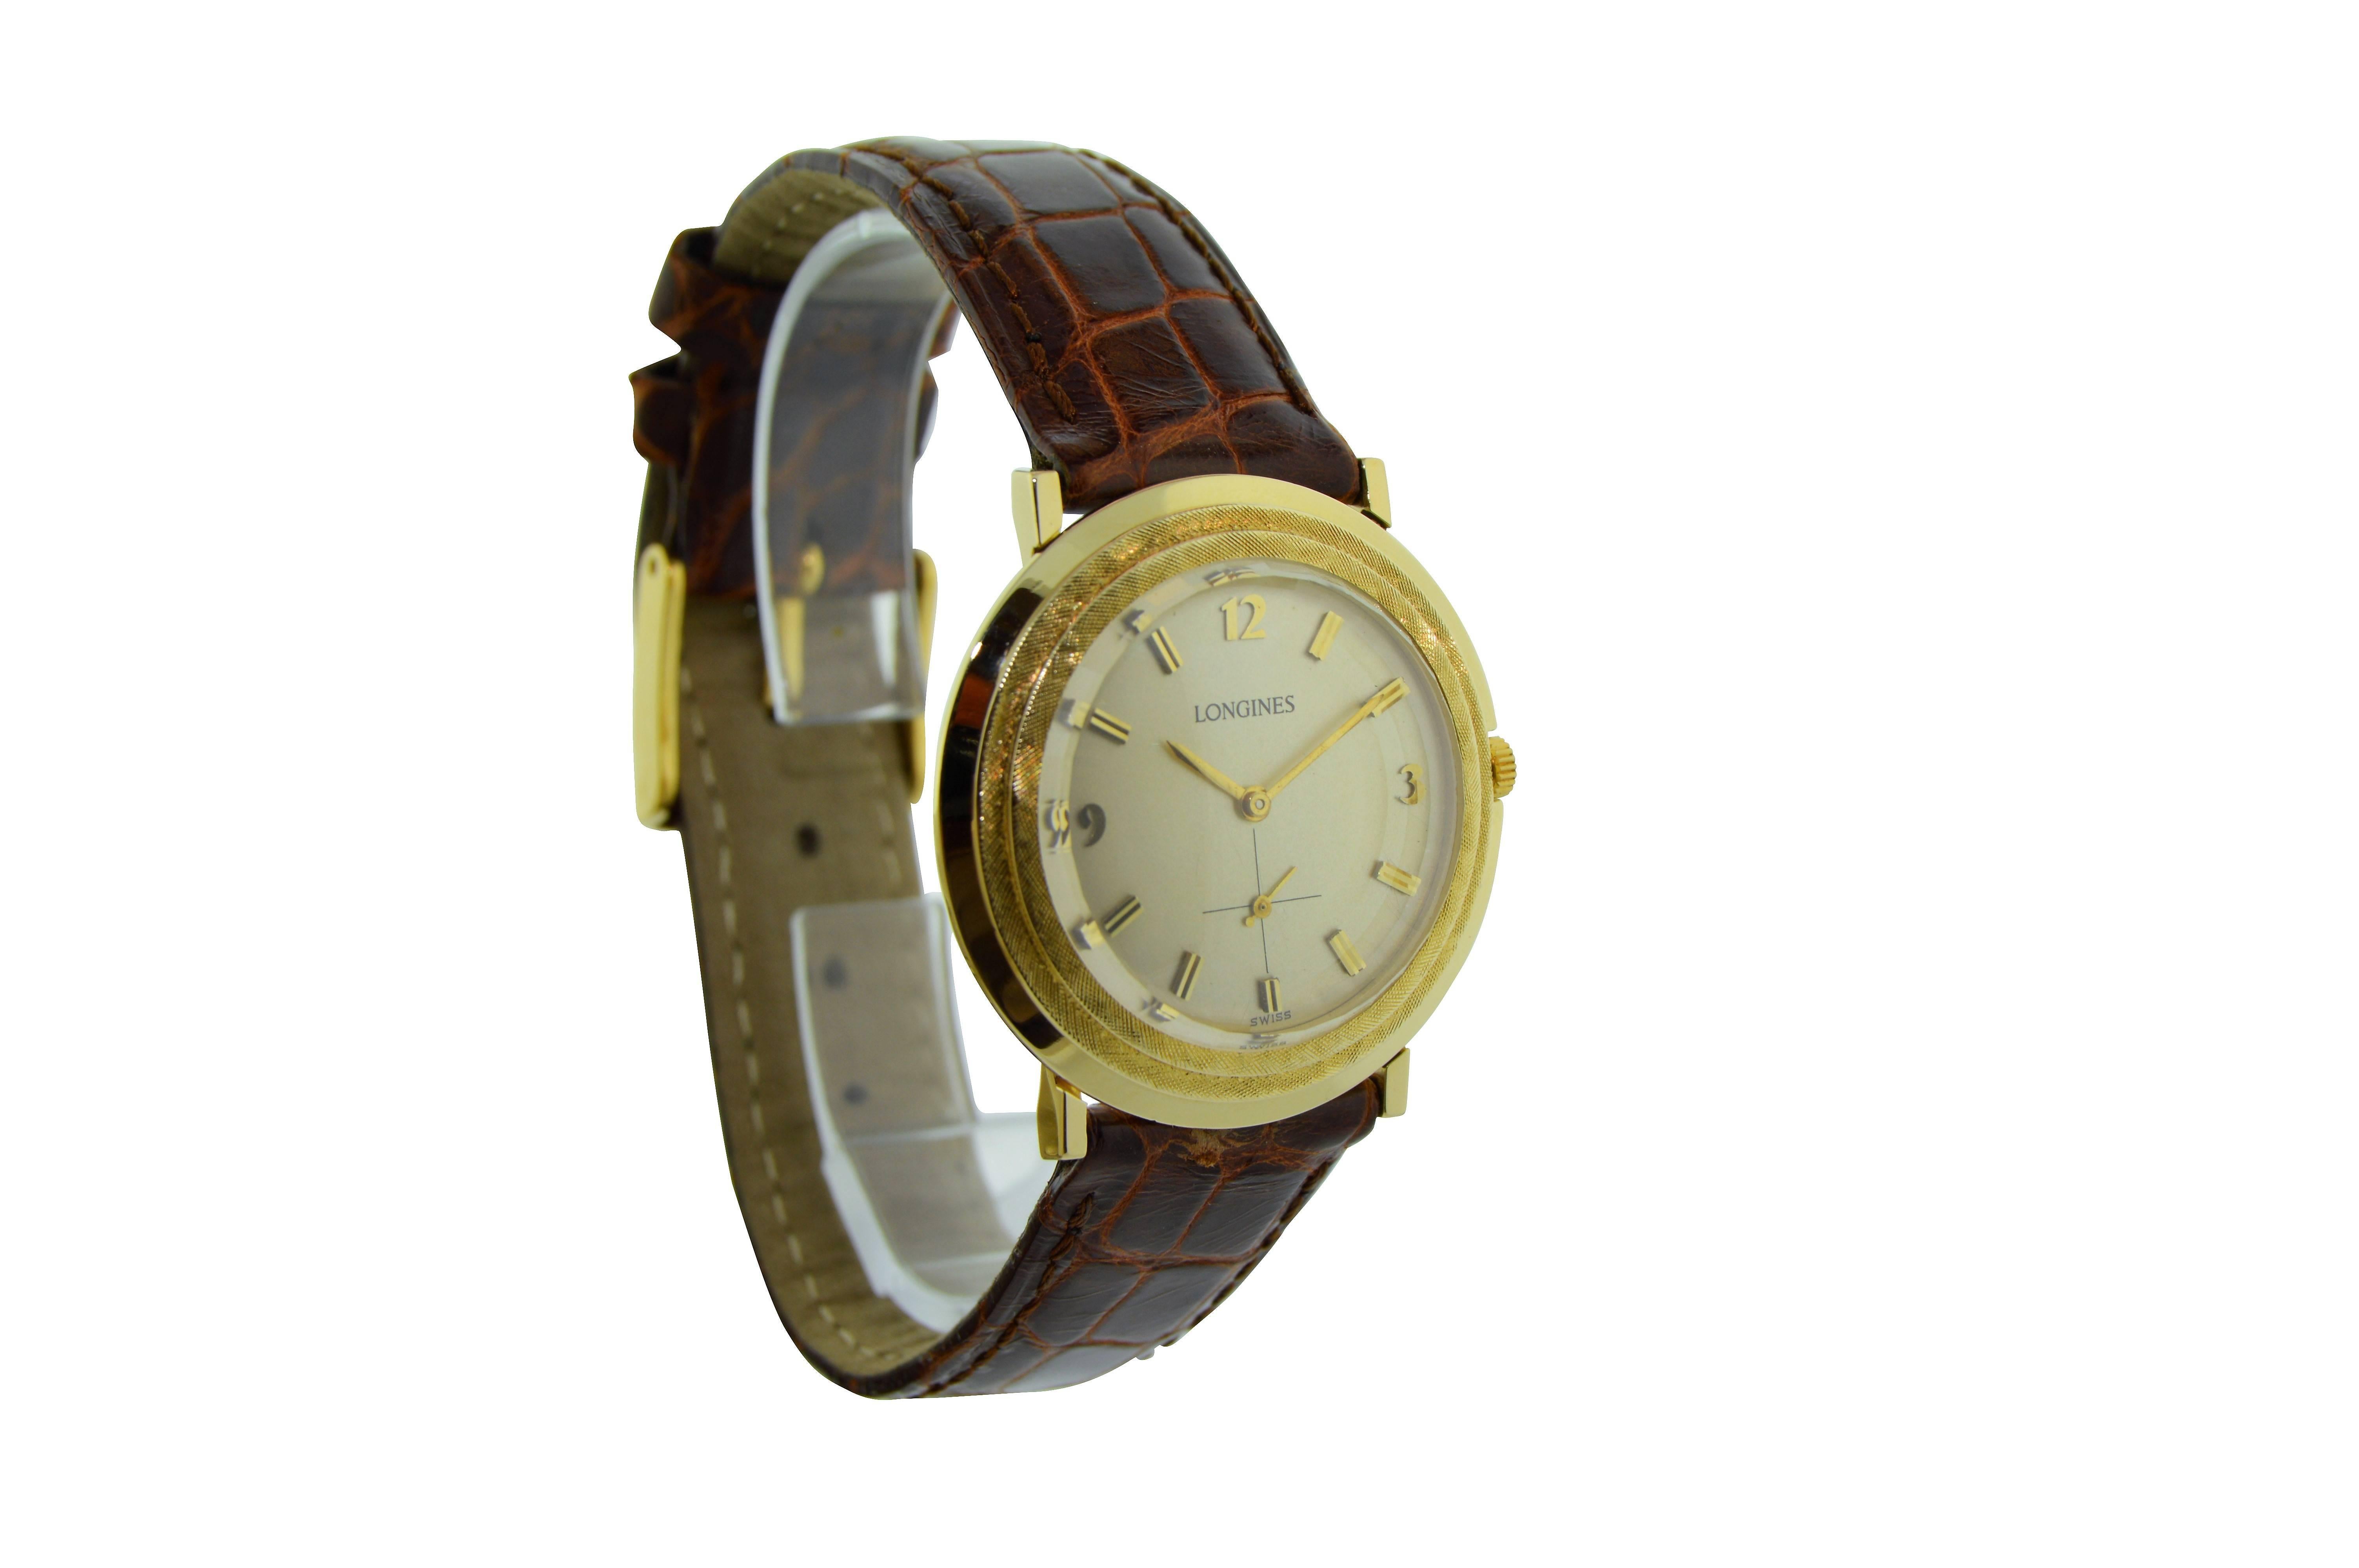 FACTORY / HOUSE: Longines Watch Company
STYLE / REFERENCE: Round / Moderne
METAL / MATERIAL: 14Kt. Solid Yellow Gold
DIMENSIONS:  34mm  X  33mm
CIRCA:  
MOVEMENT / CALIBER: 17 Jewels / Manual Winding
DIAL / HANDS: Original Silvered / Baton